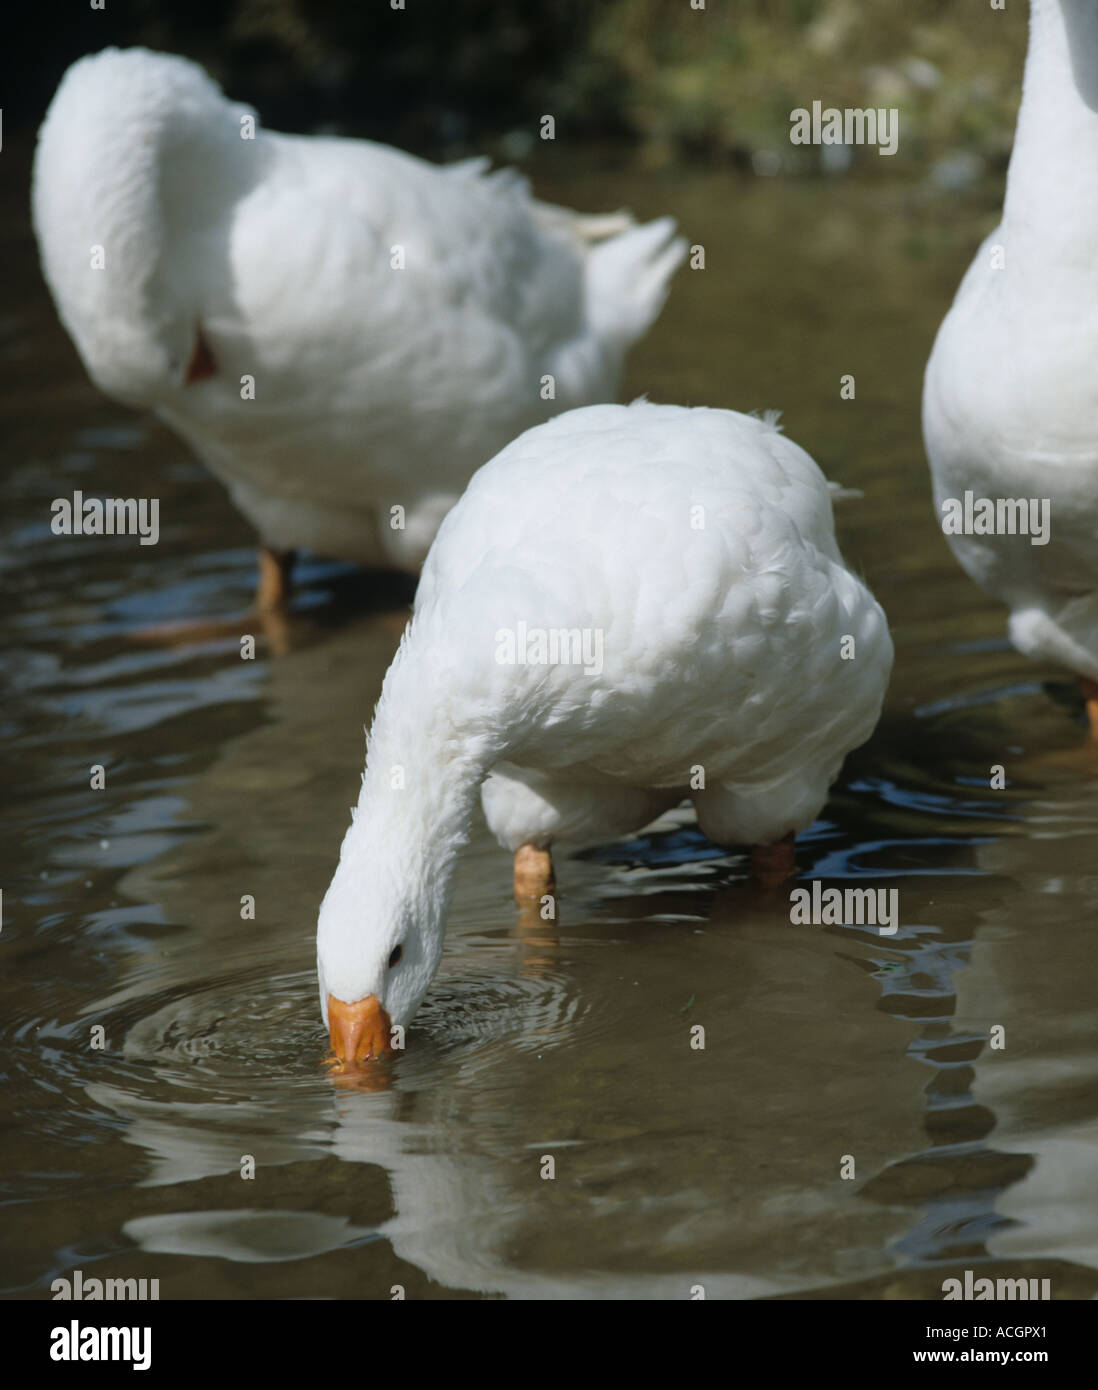 Adult goose on a farm drinking from a stream Stock Photo